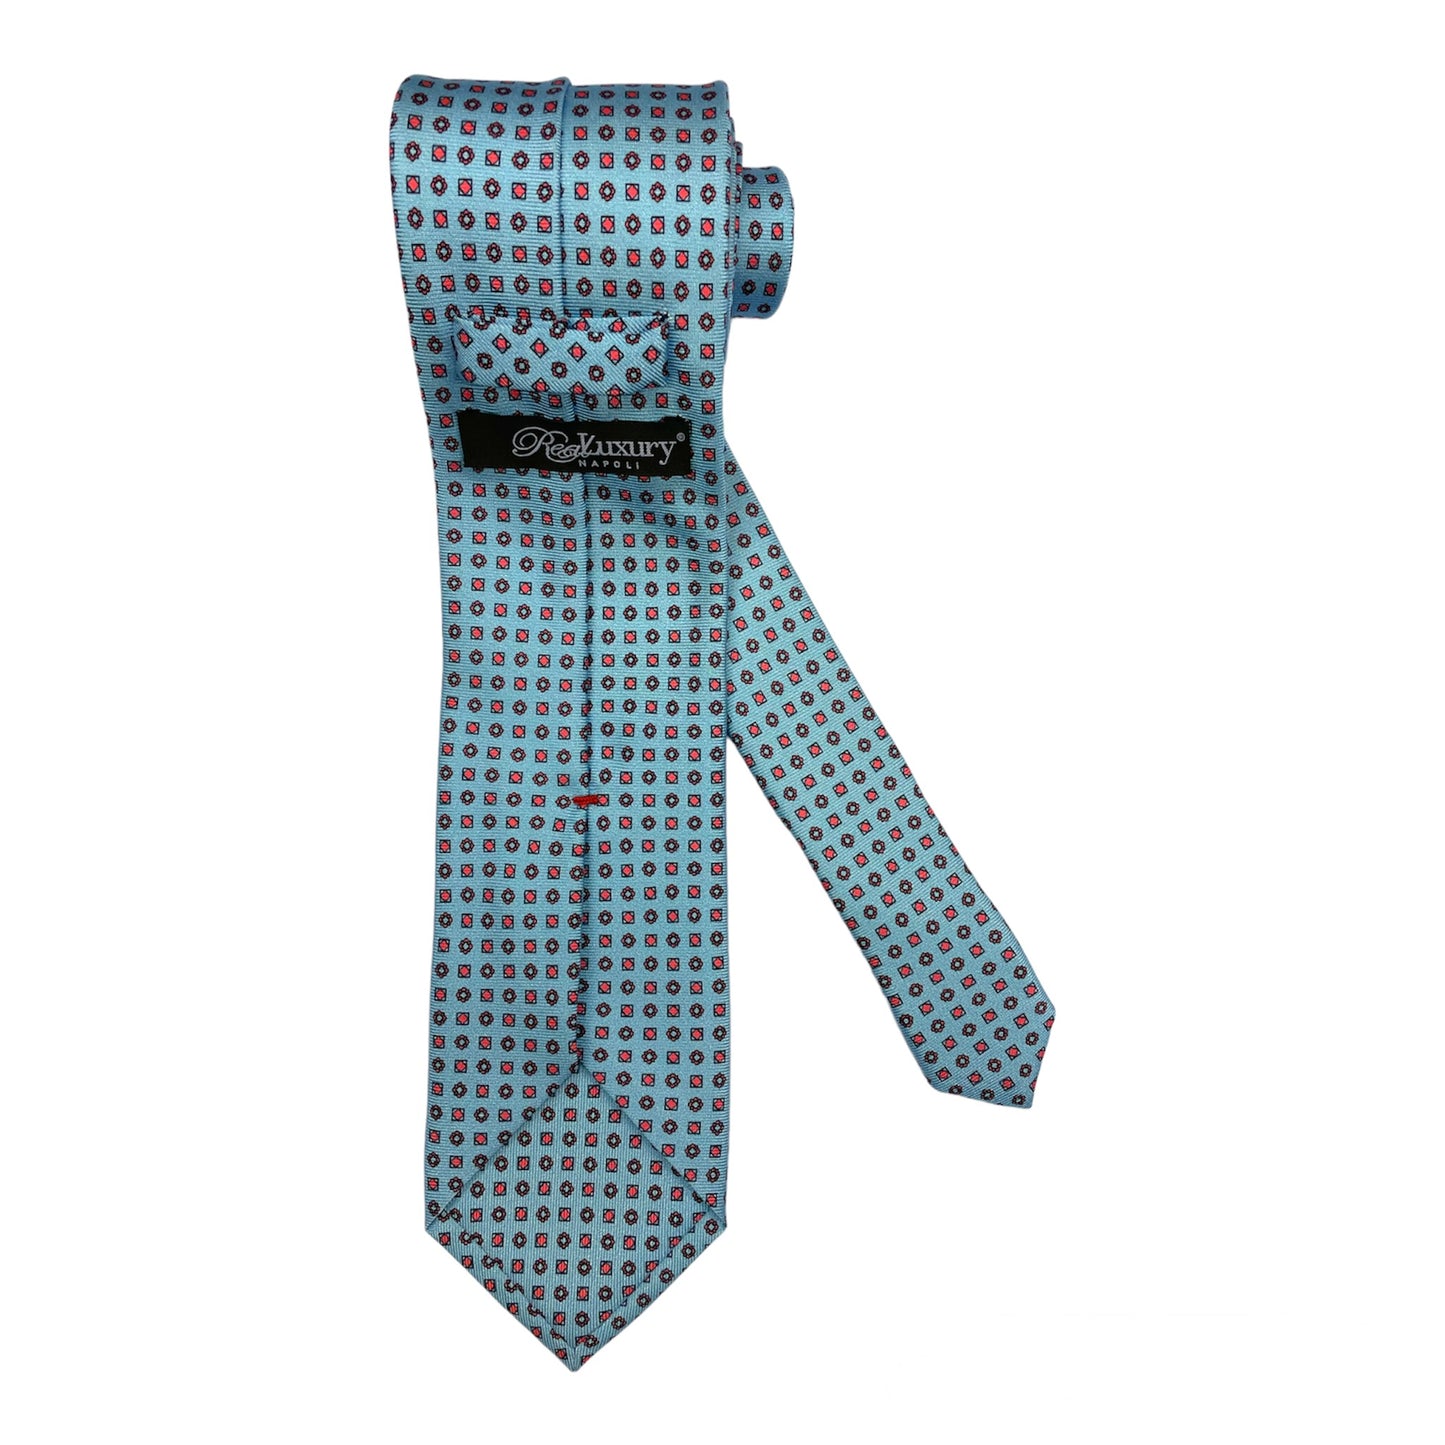 Light blue silk tie with flowers and checks